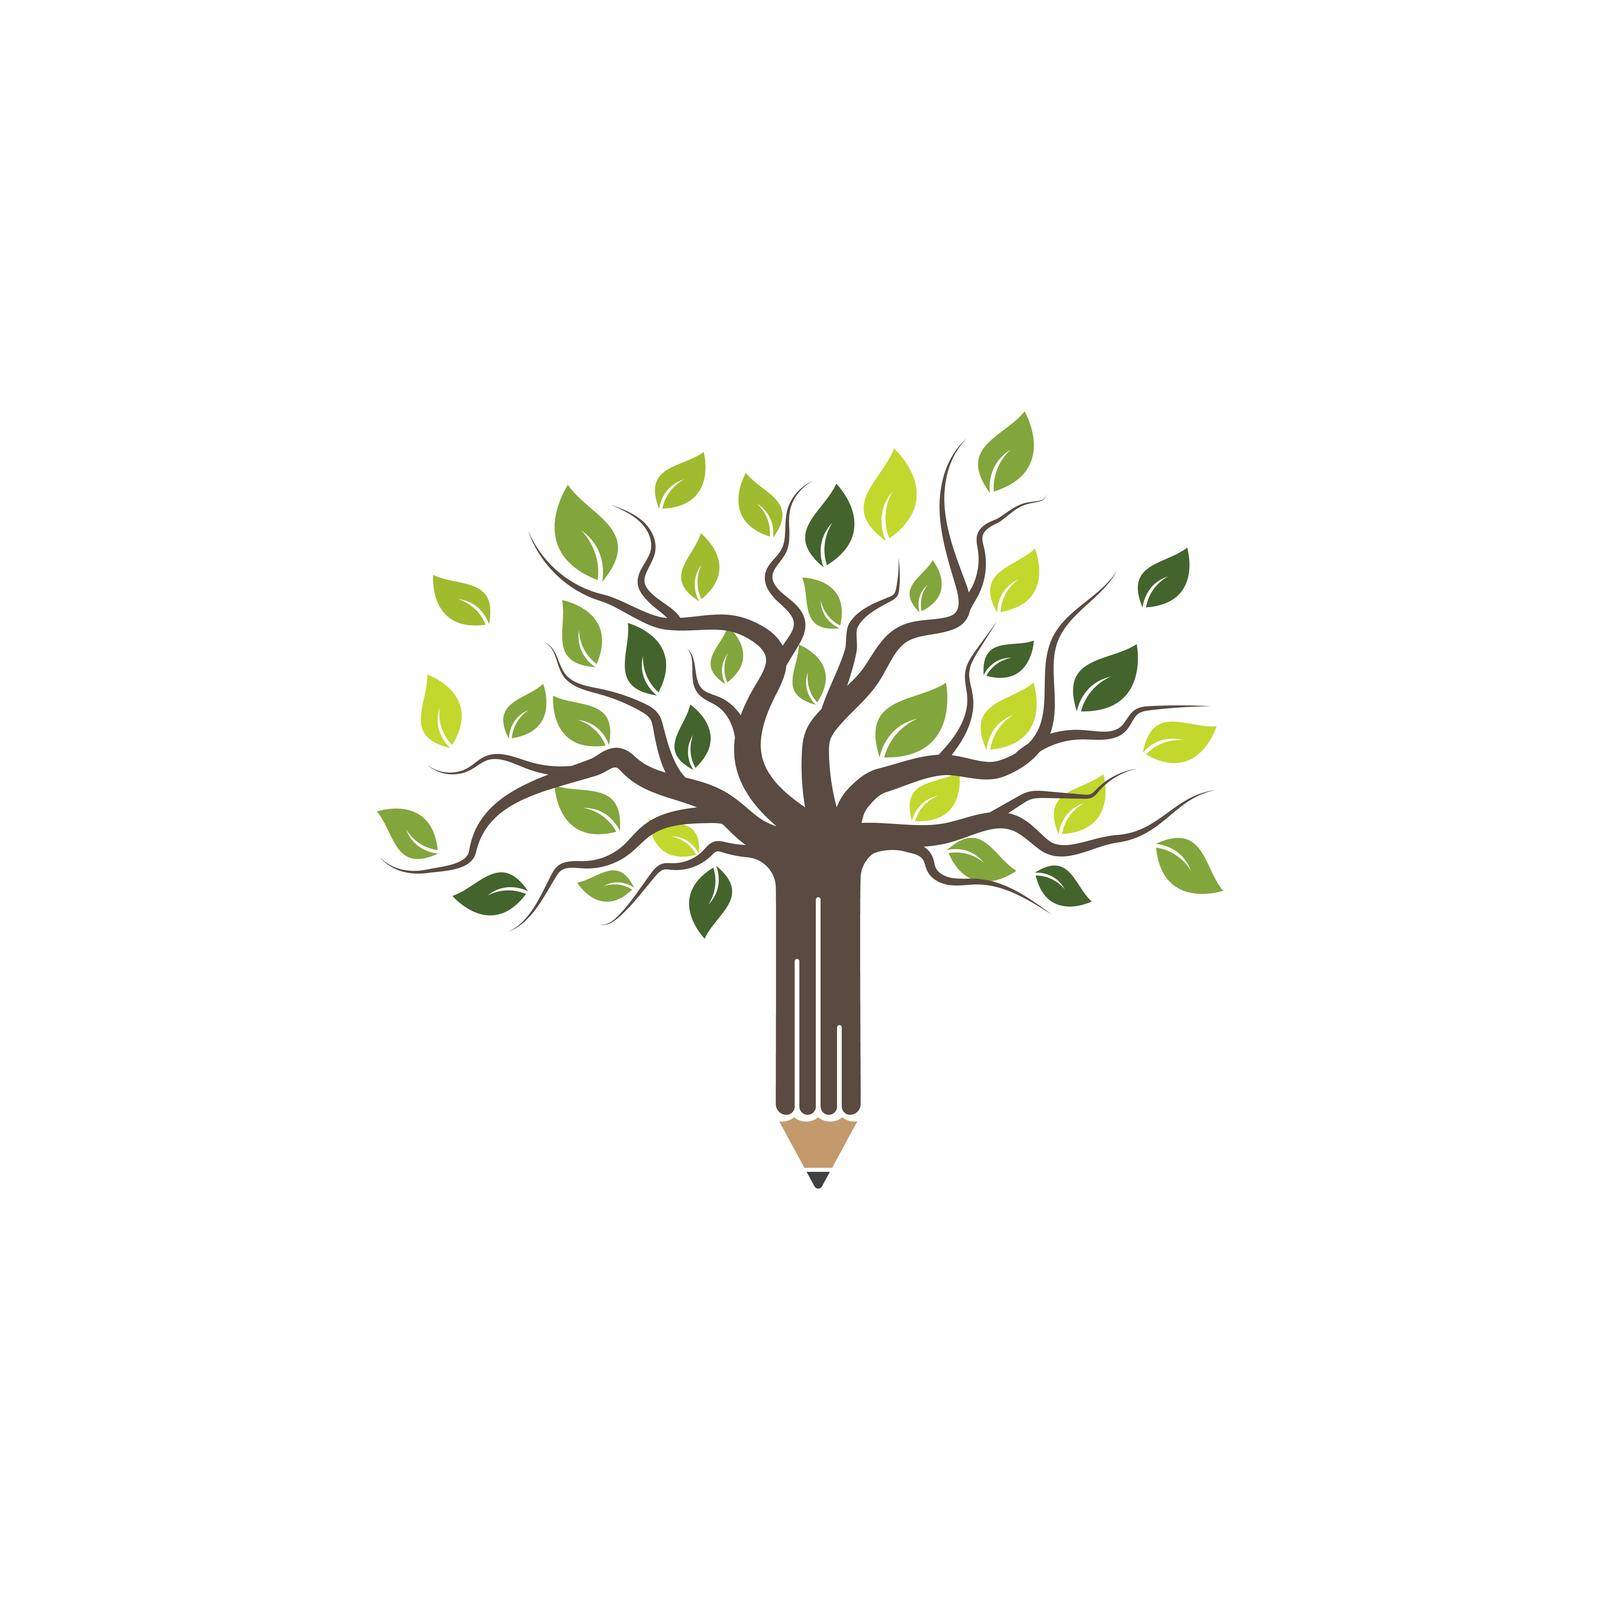 Tree with pencil writer by awk